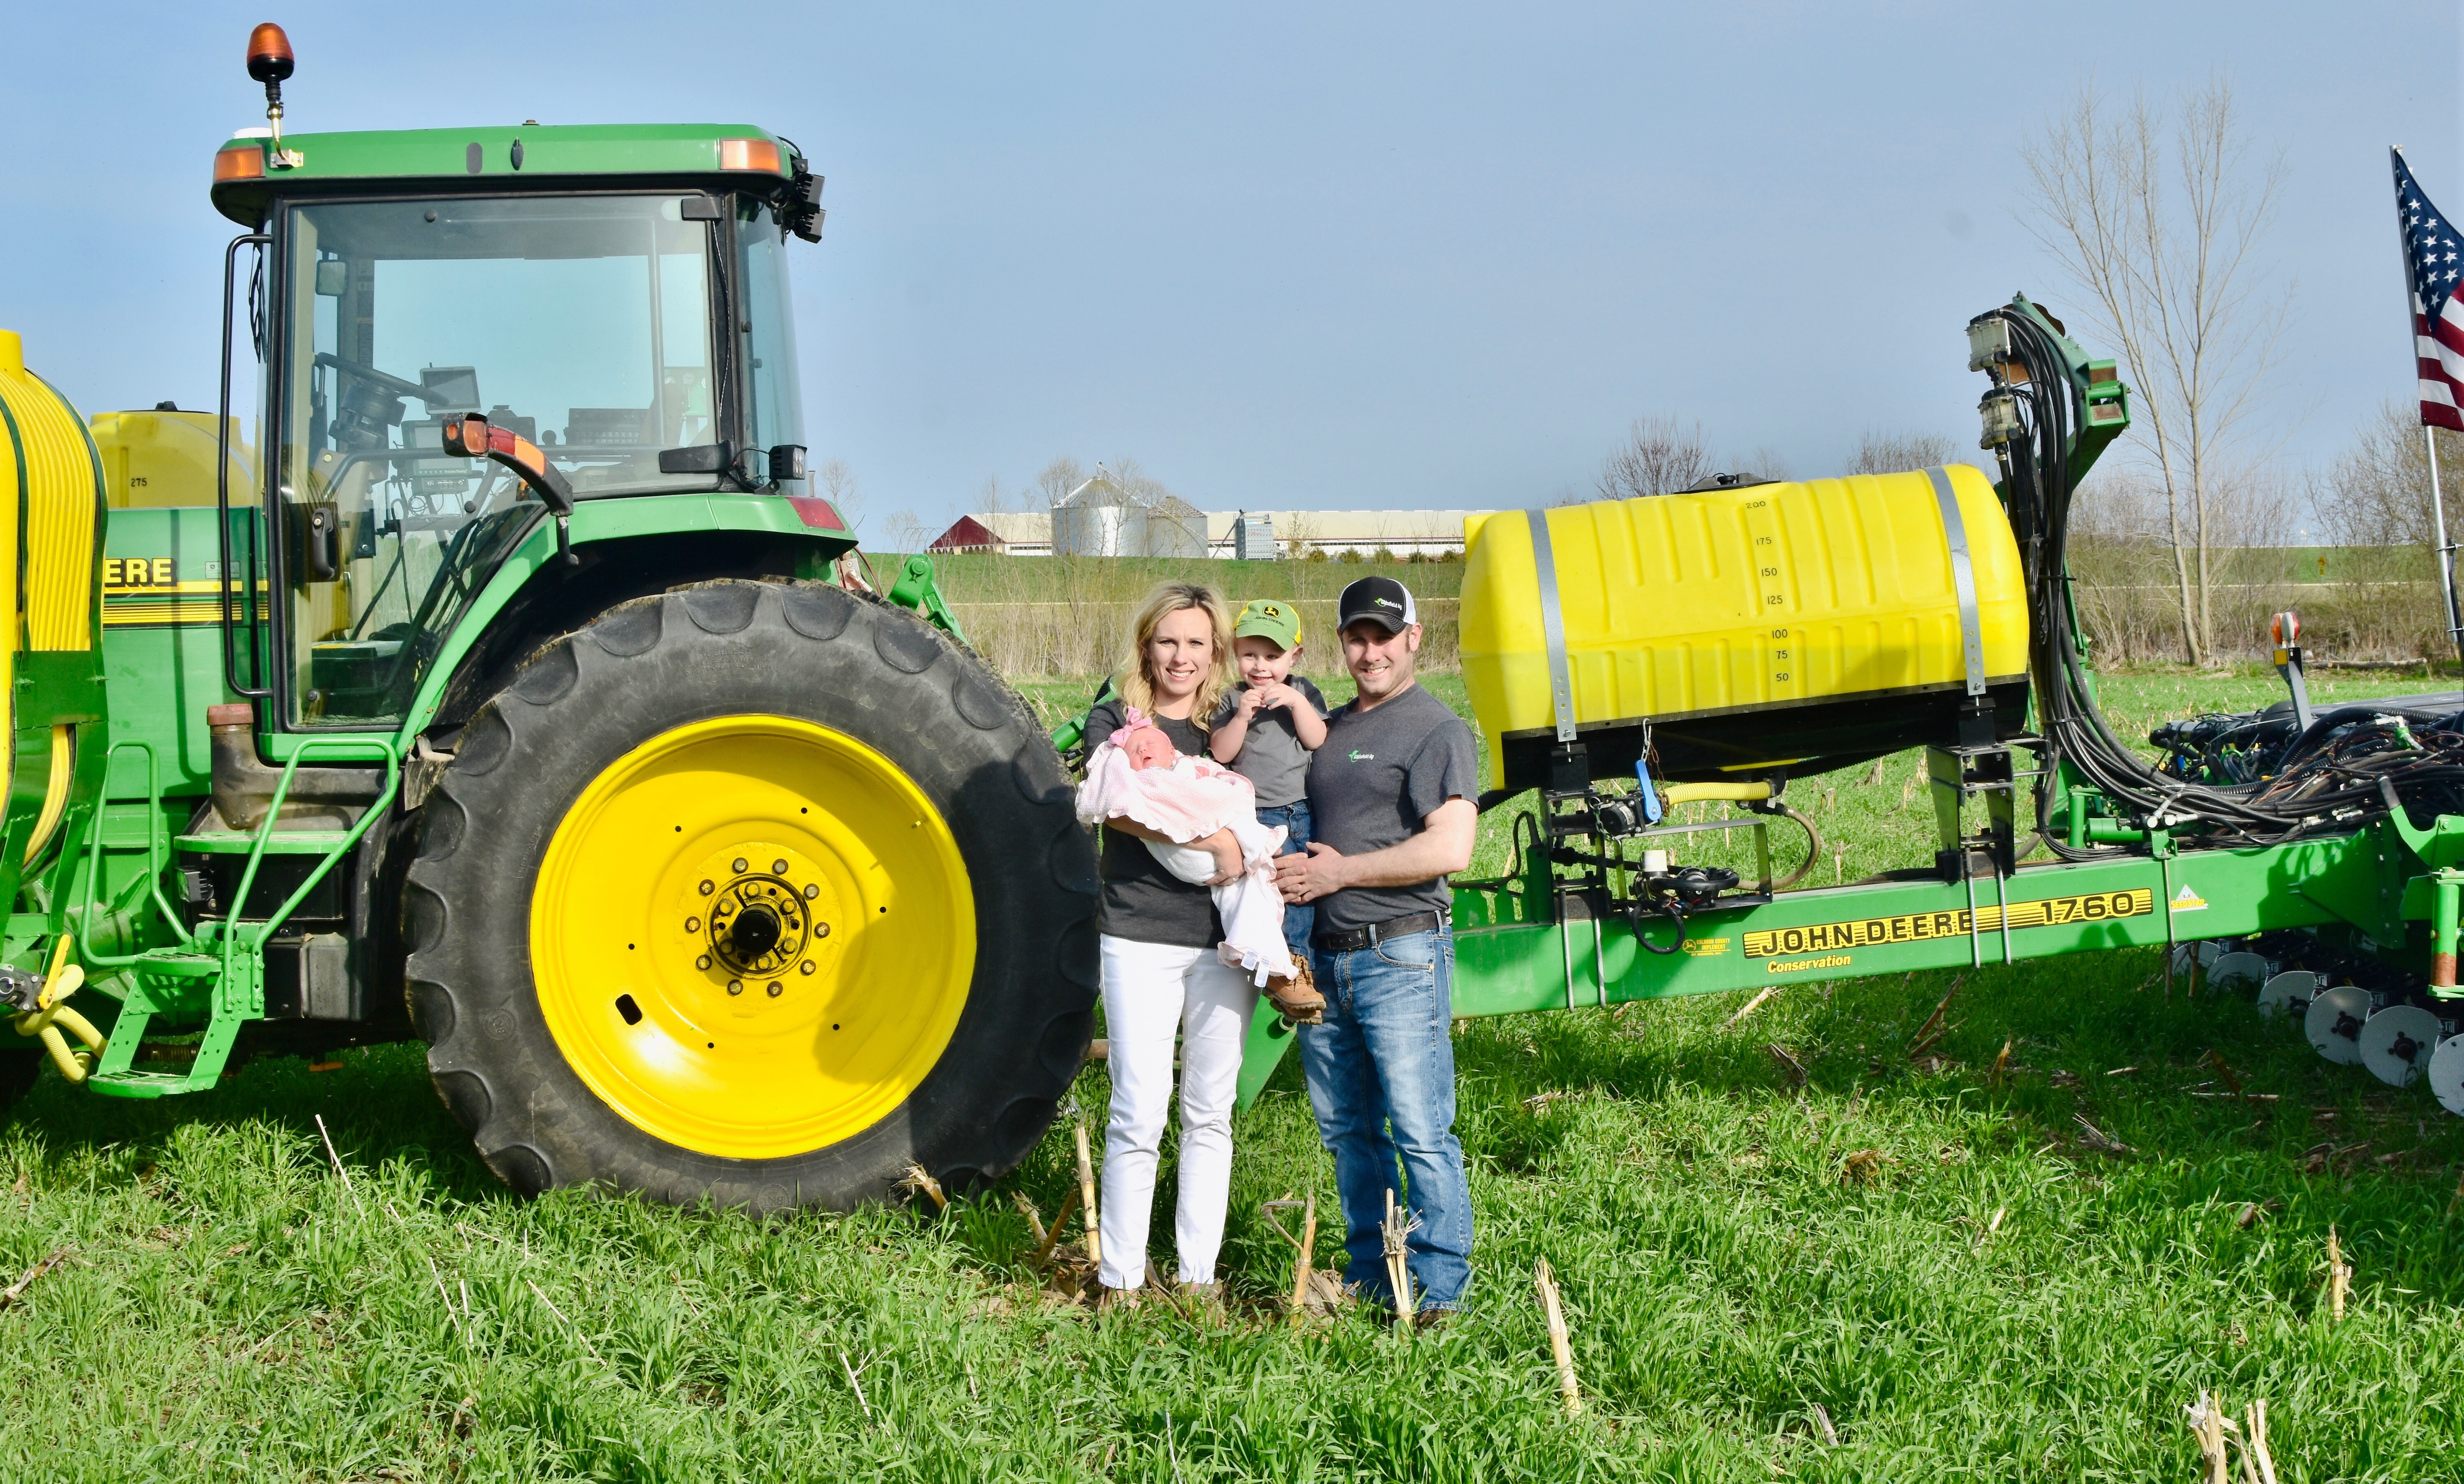 Gibbs family poses in front of a tractor in a field